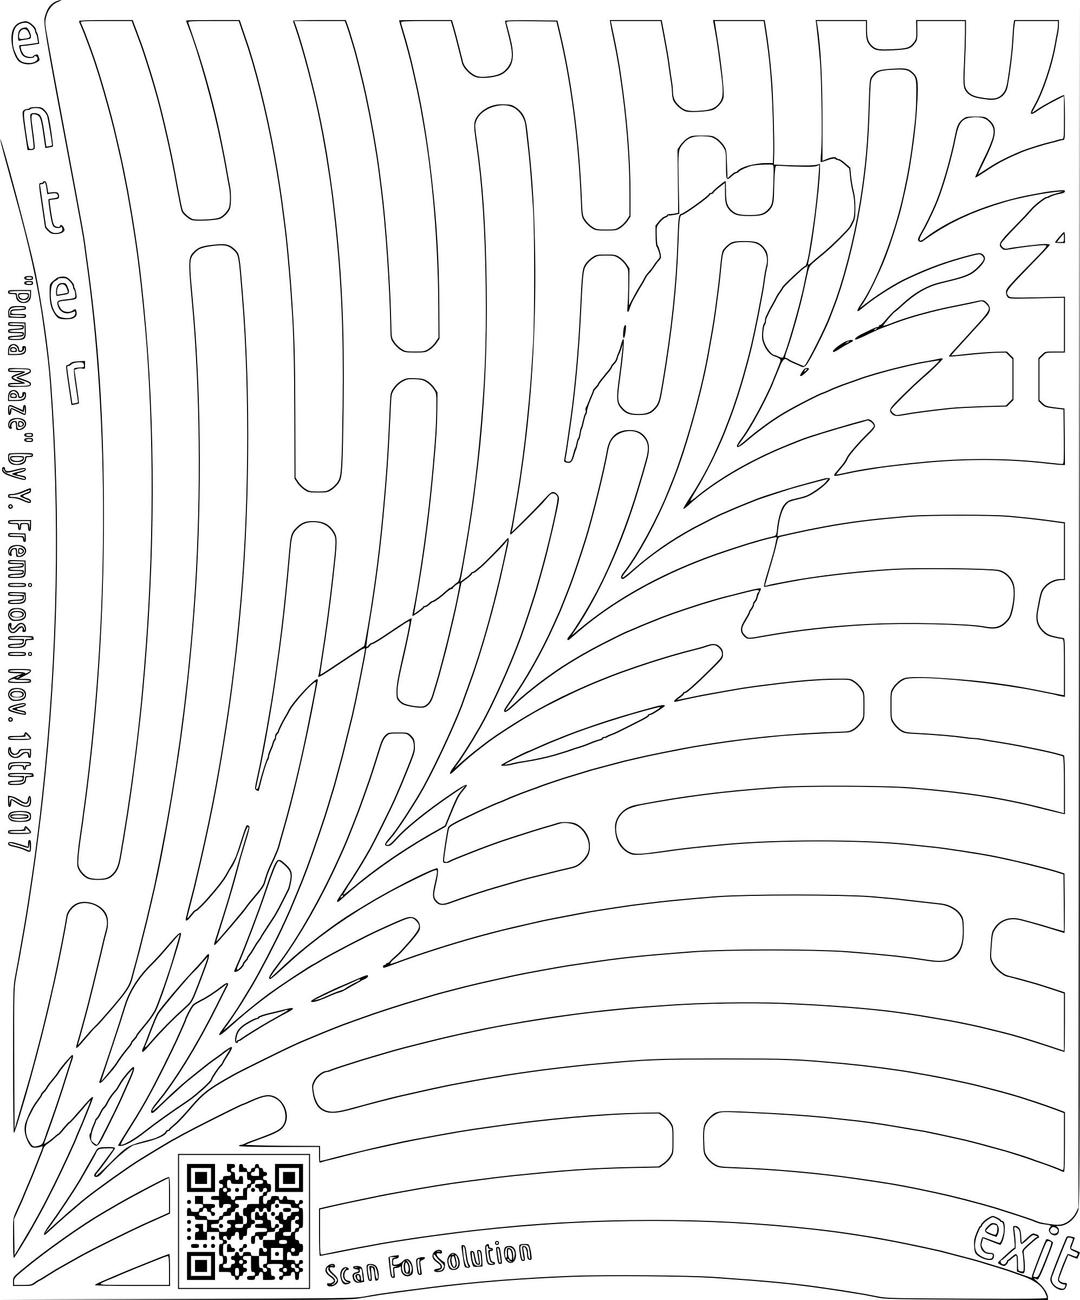 Leaping Puma Coloring Page Maze png transparent